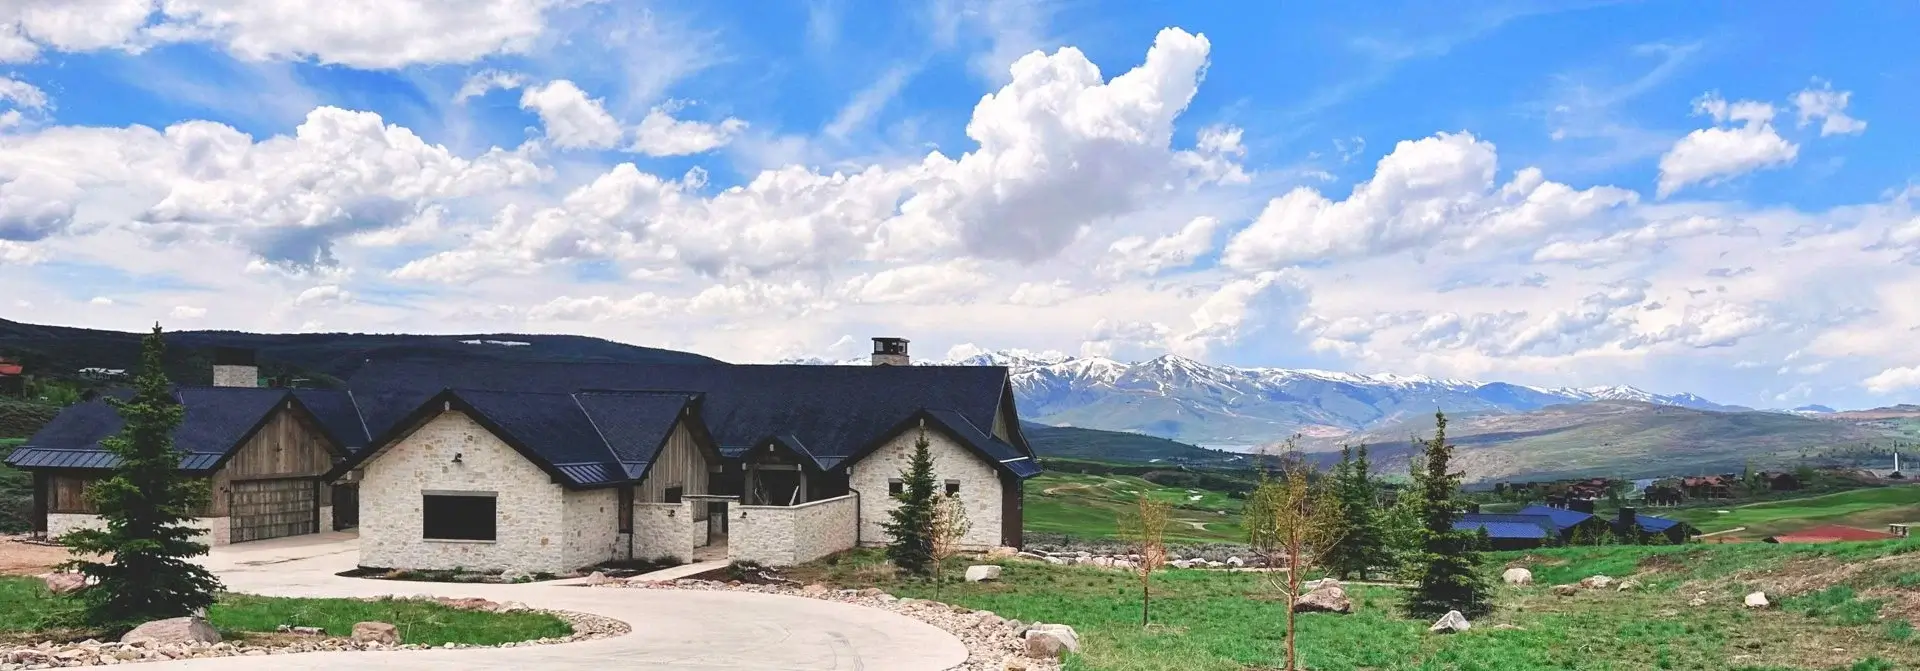 Luxury homes and land for sale in Victory Ranch - your guide to Park City golf community living